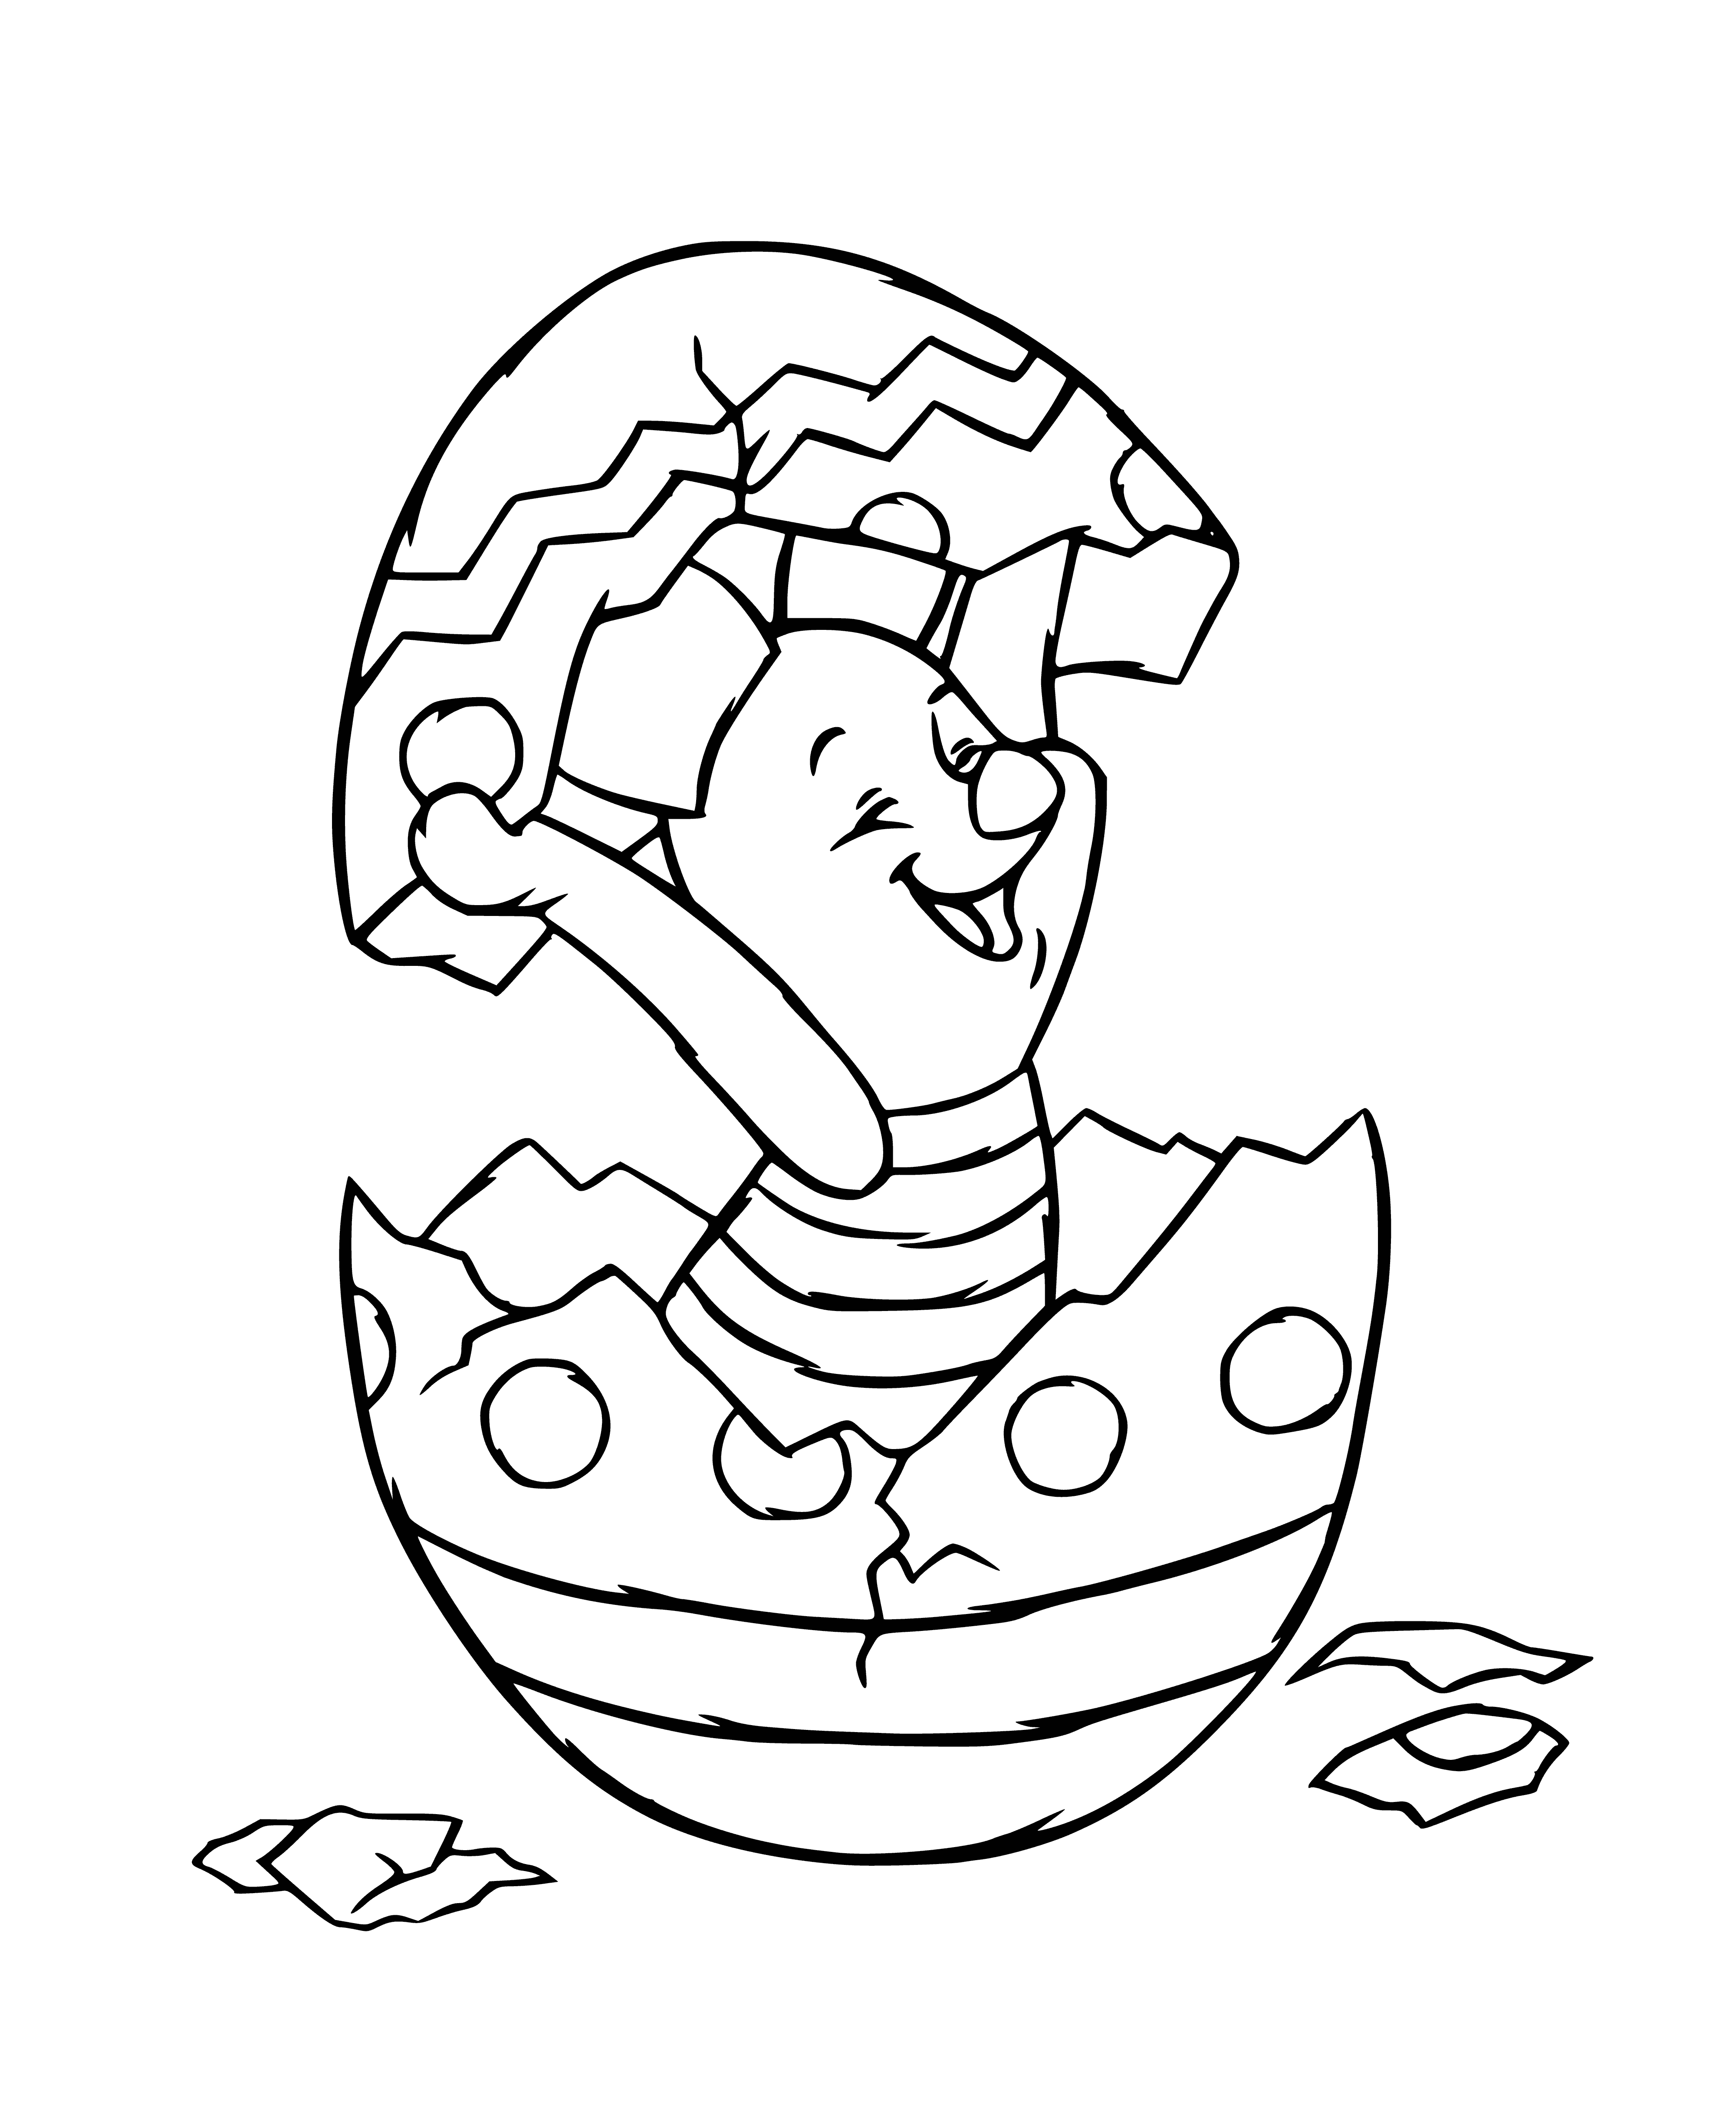 Pig Piglet coloring page